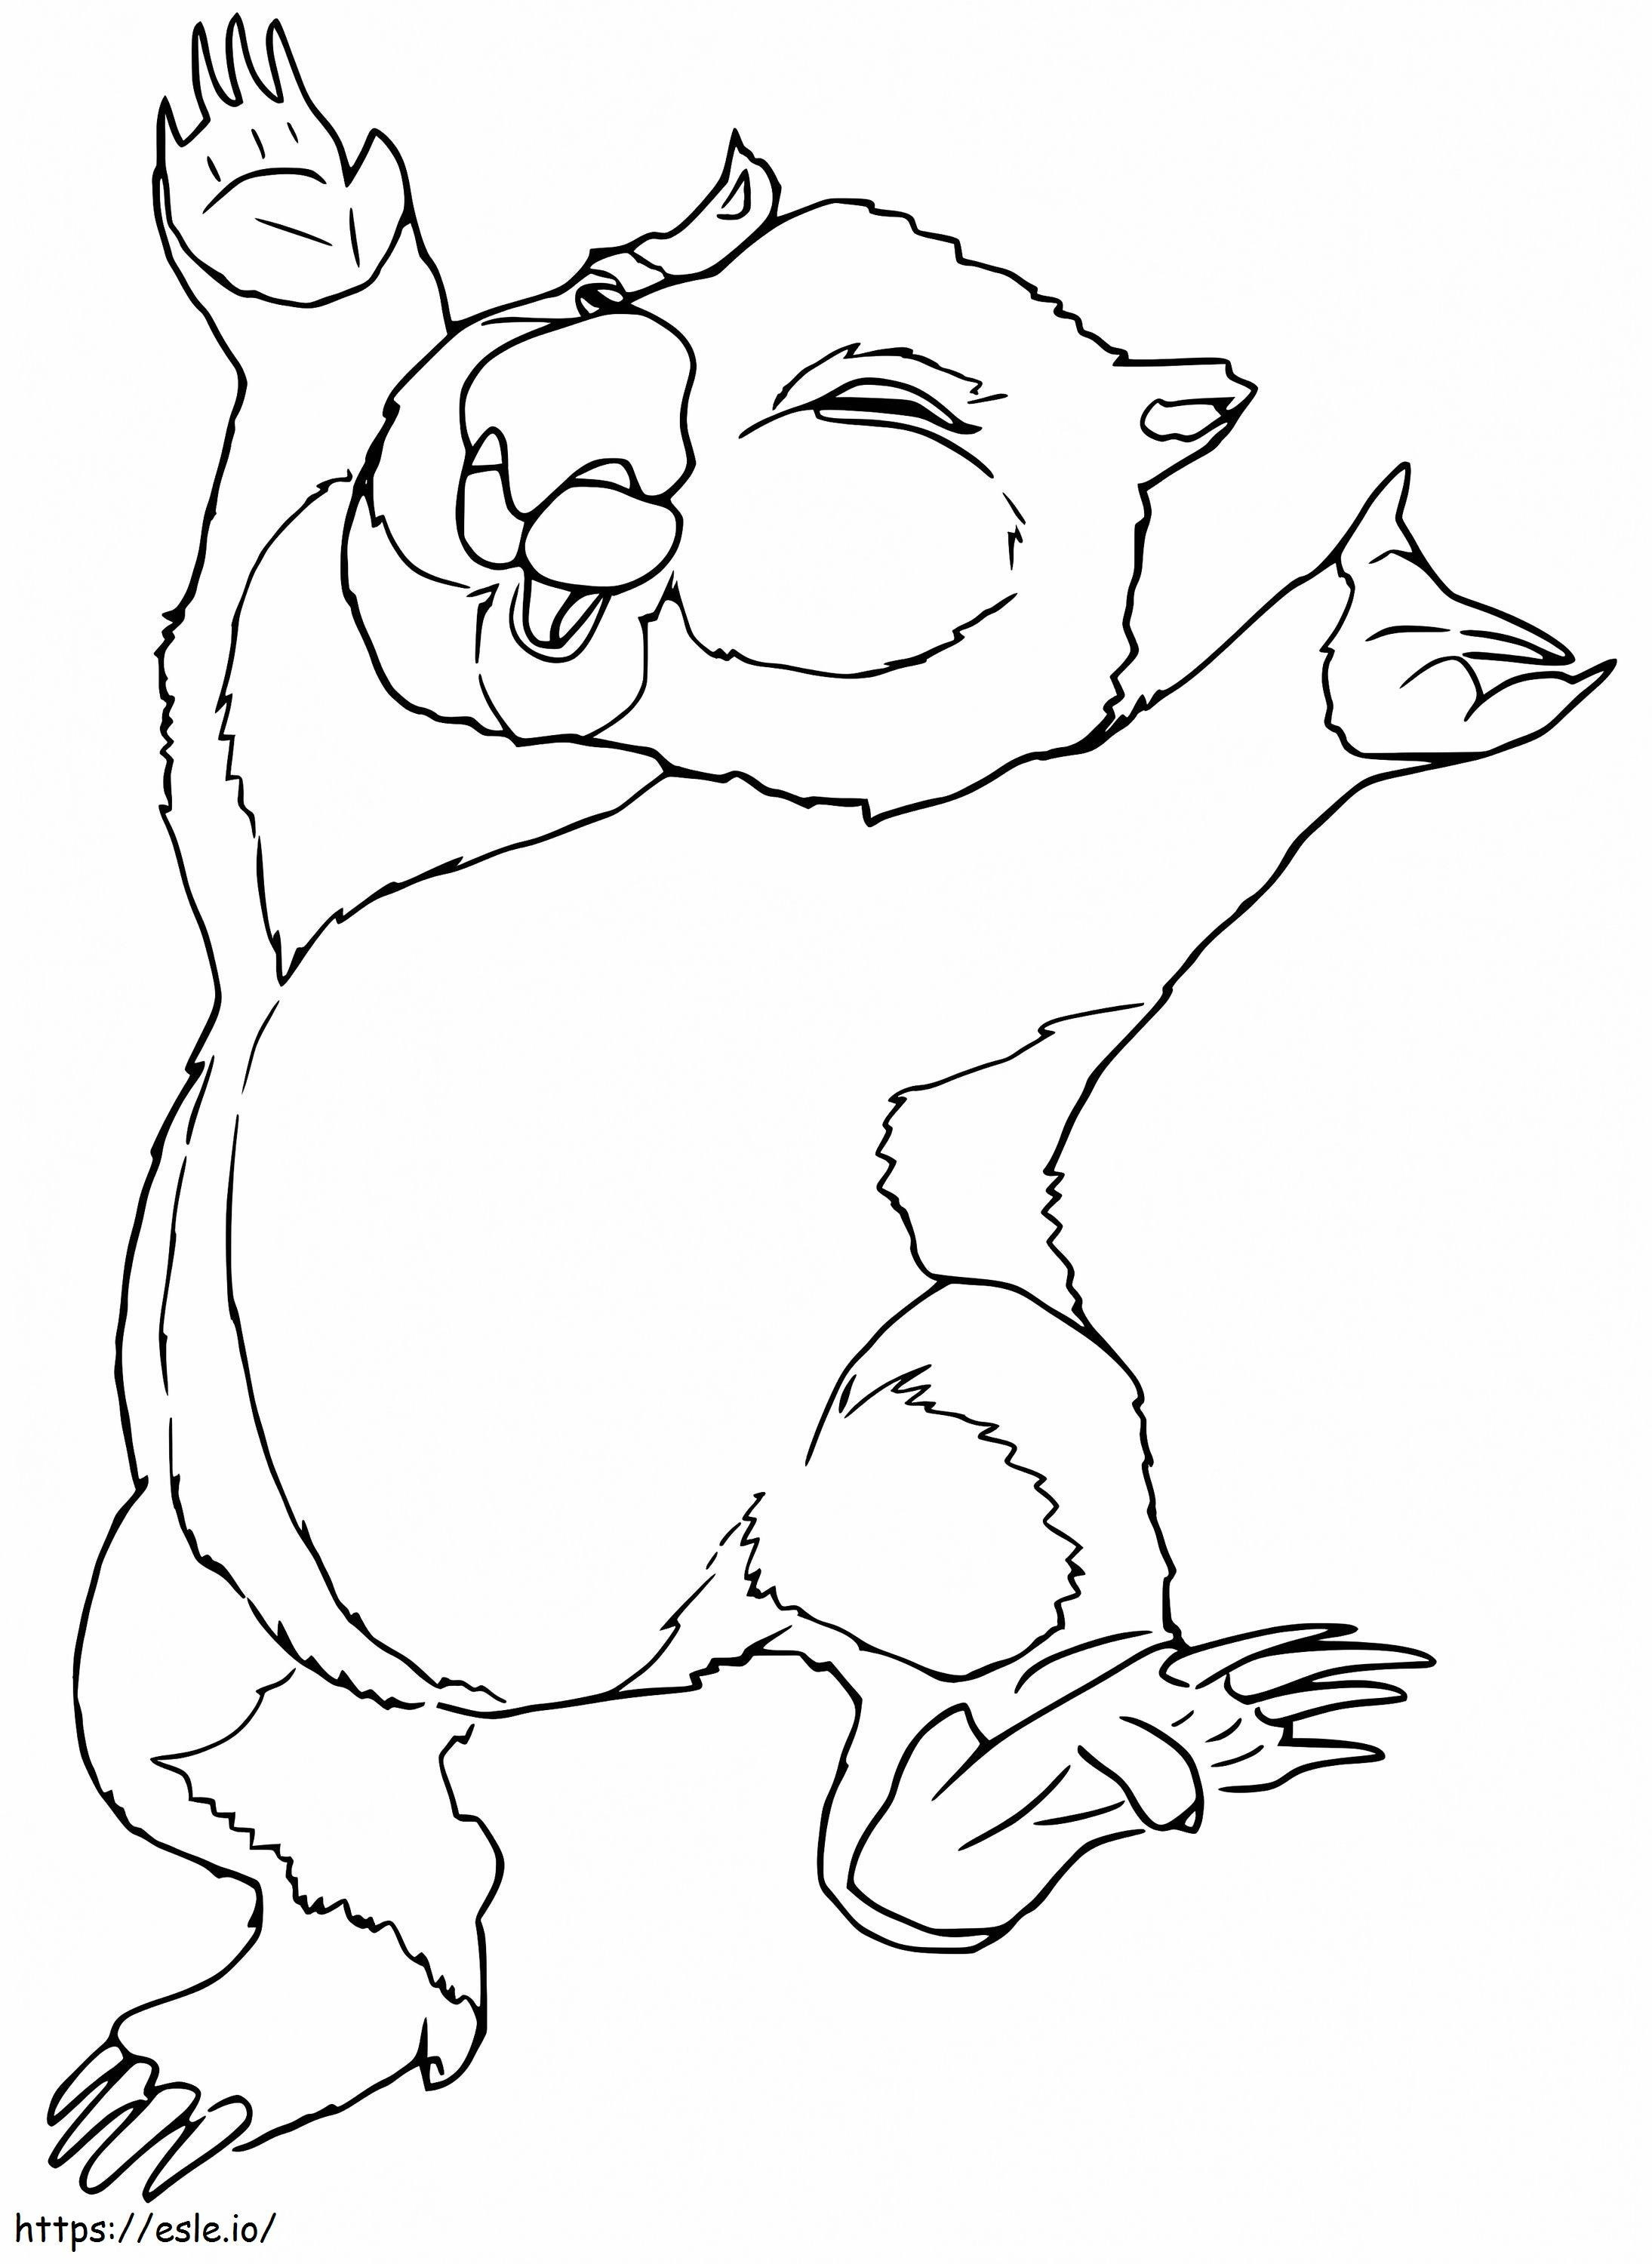 Cartoon Happy Wombat coloring page